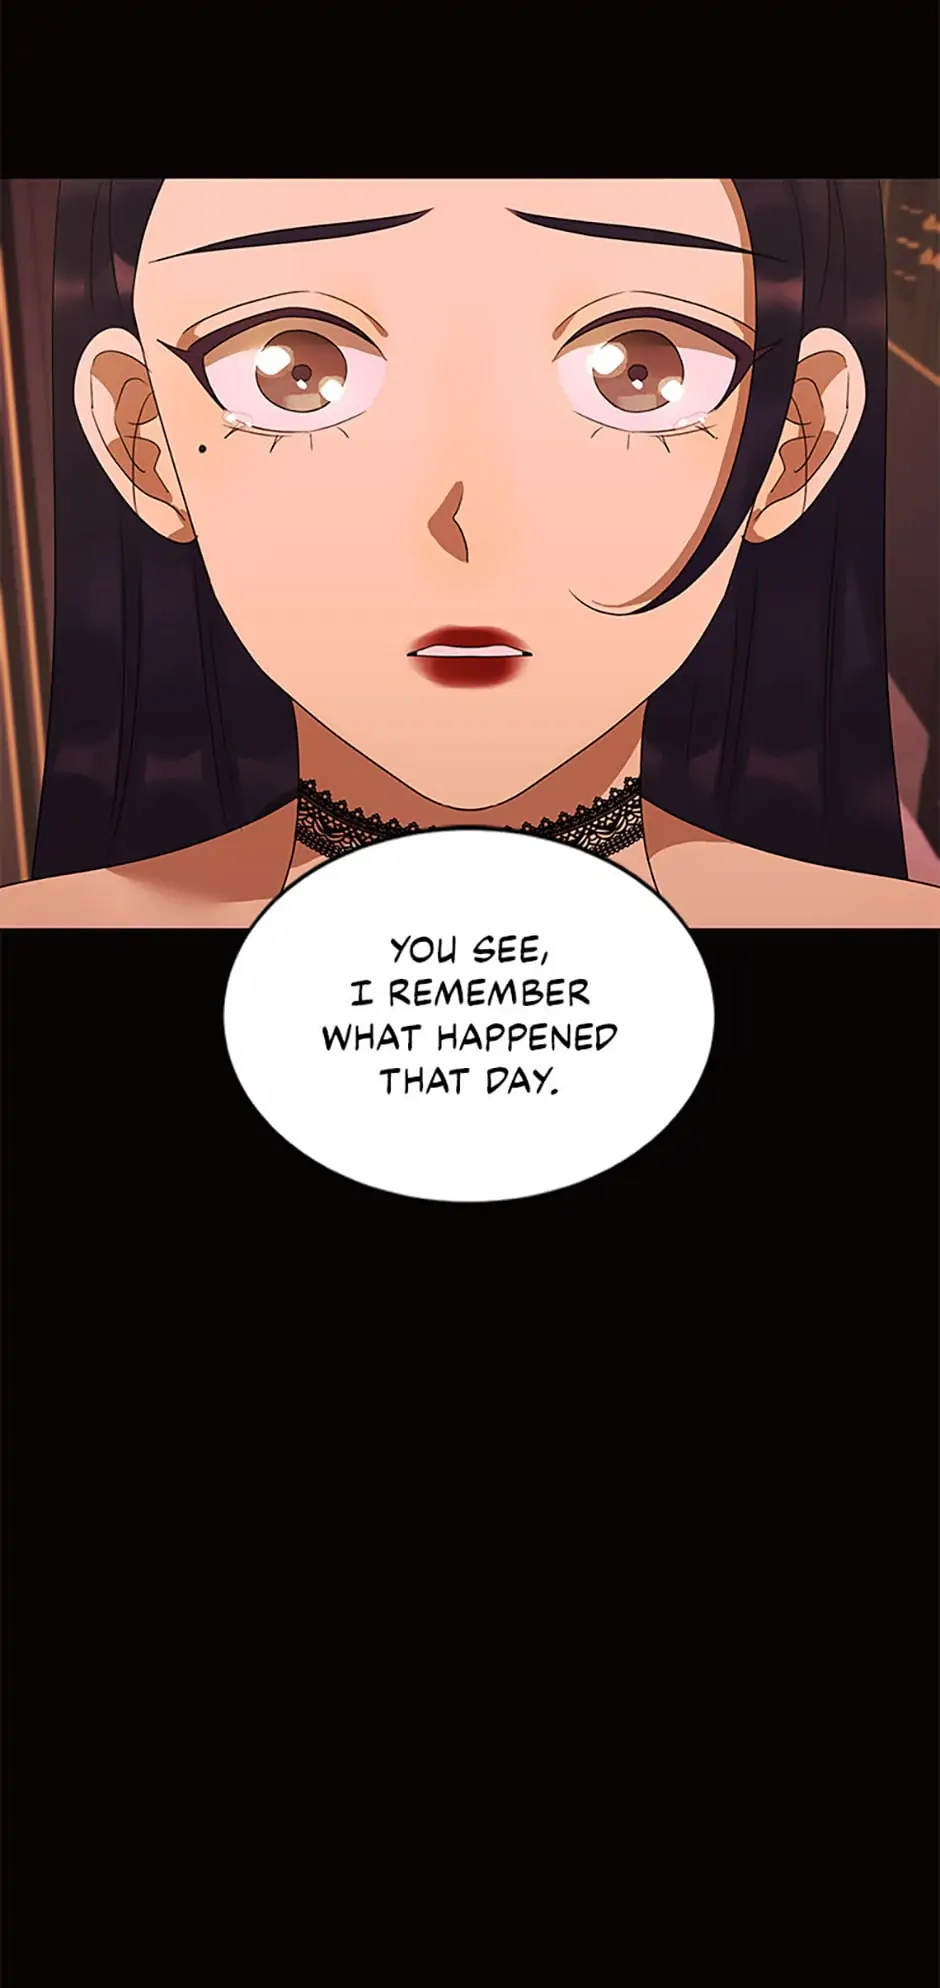 The Villainess’s Debut chapter 30